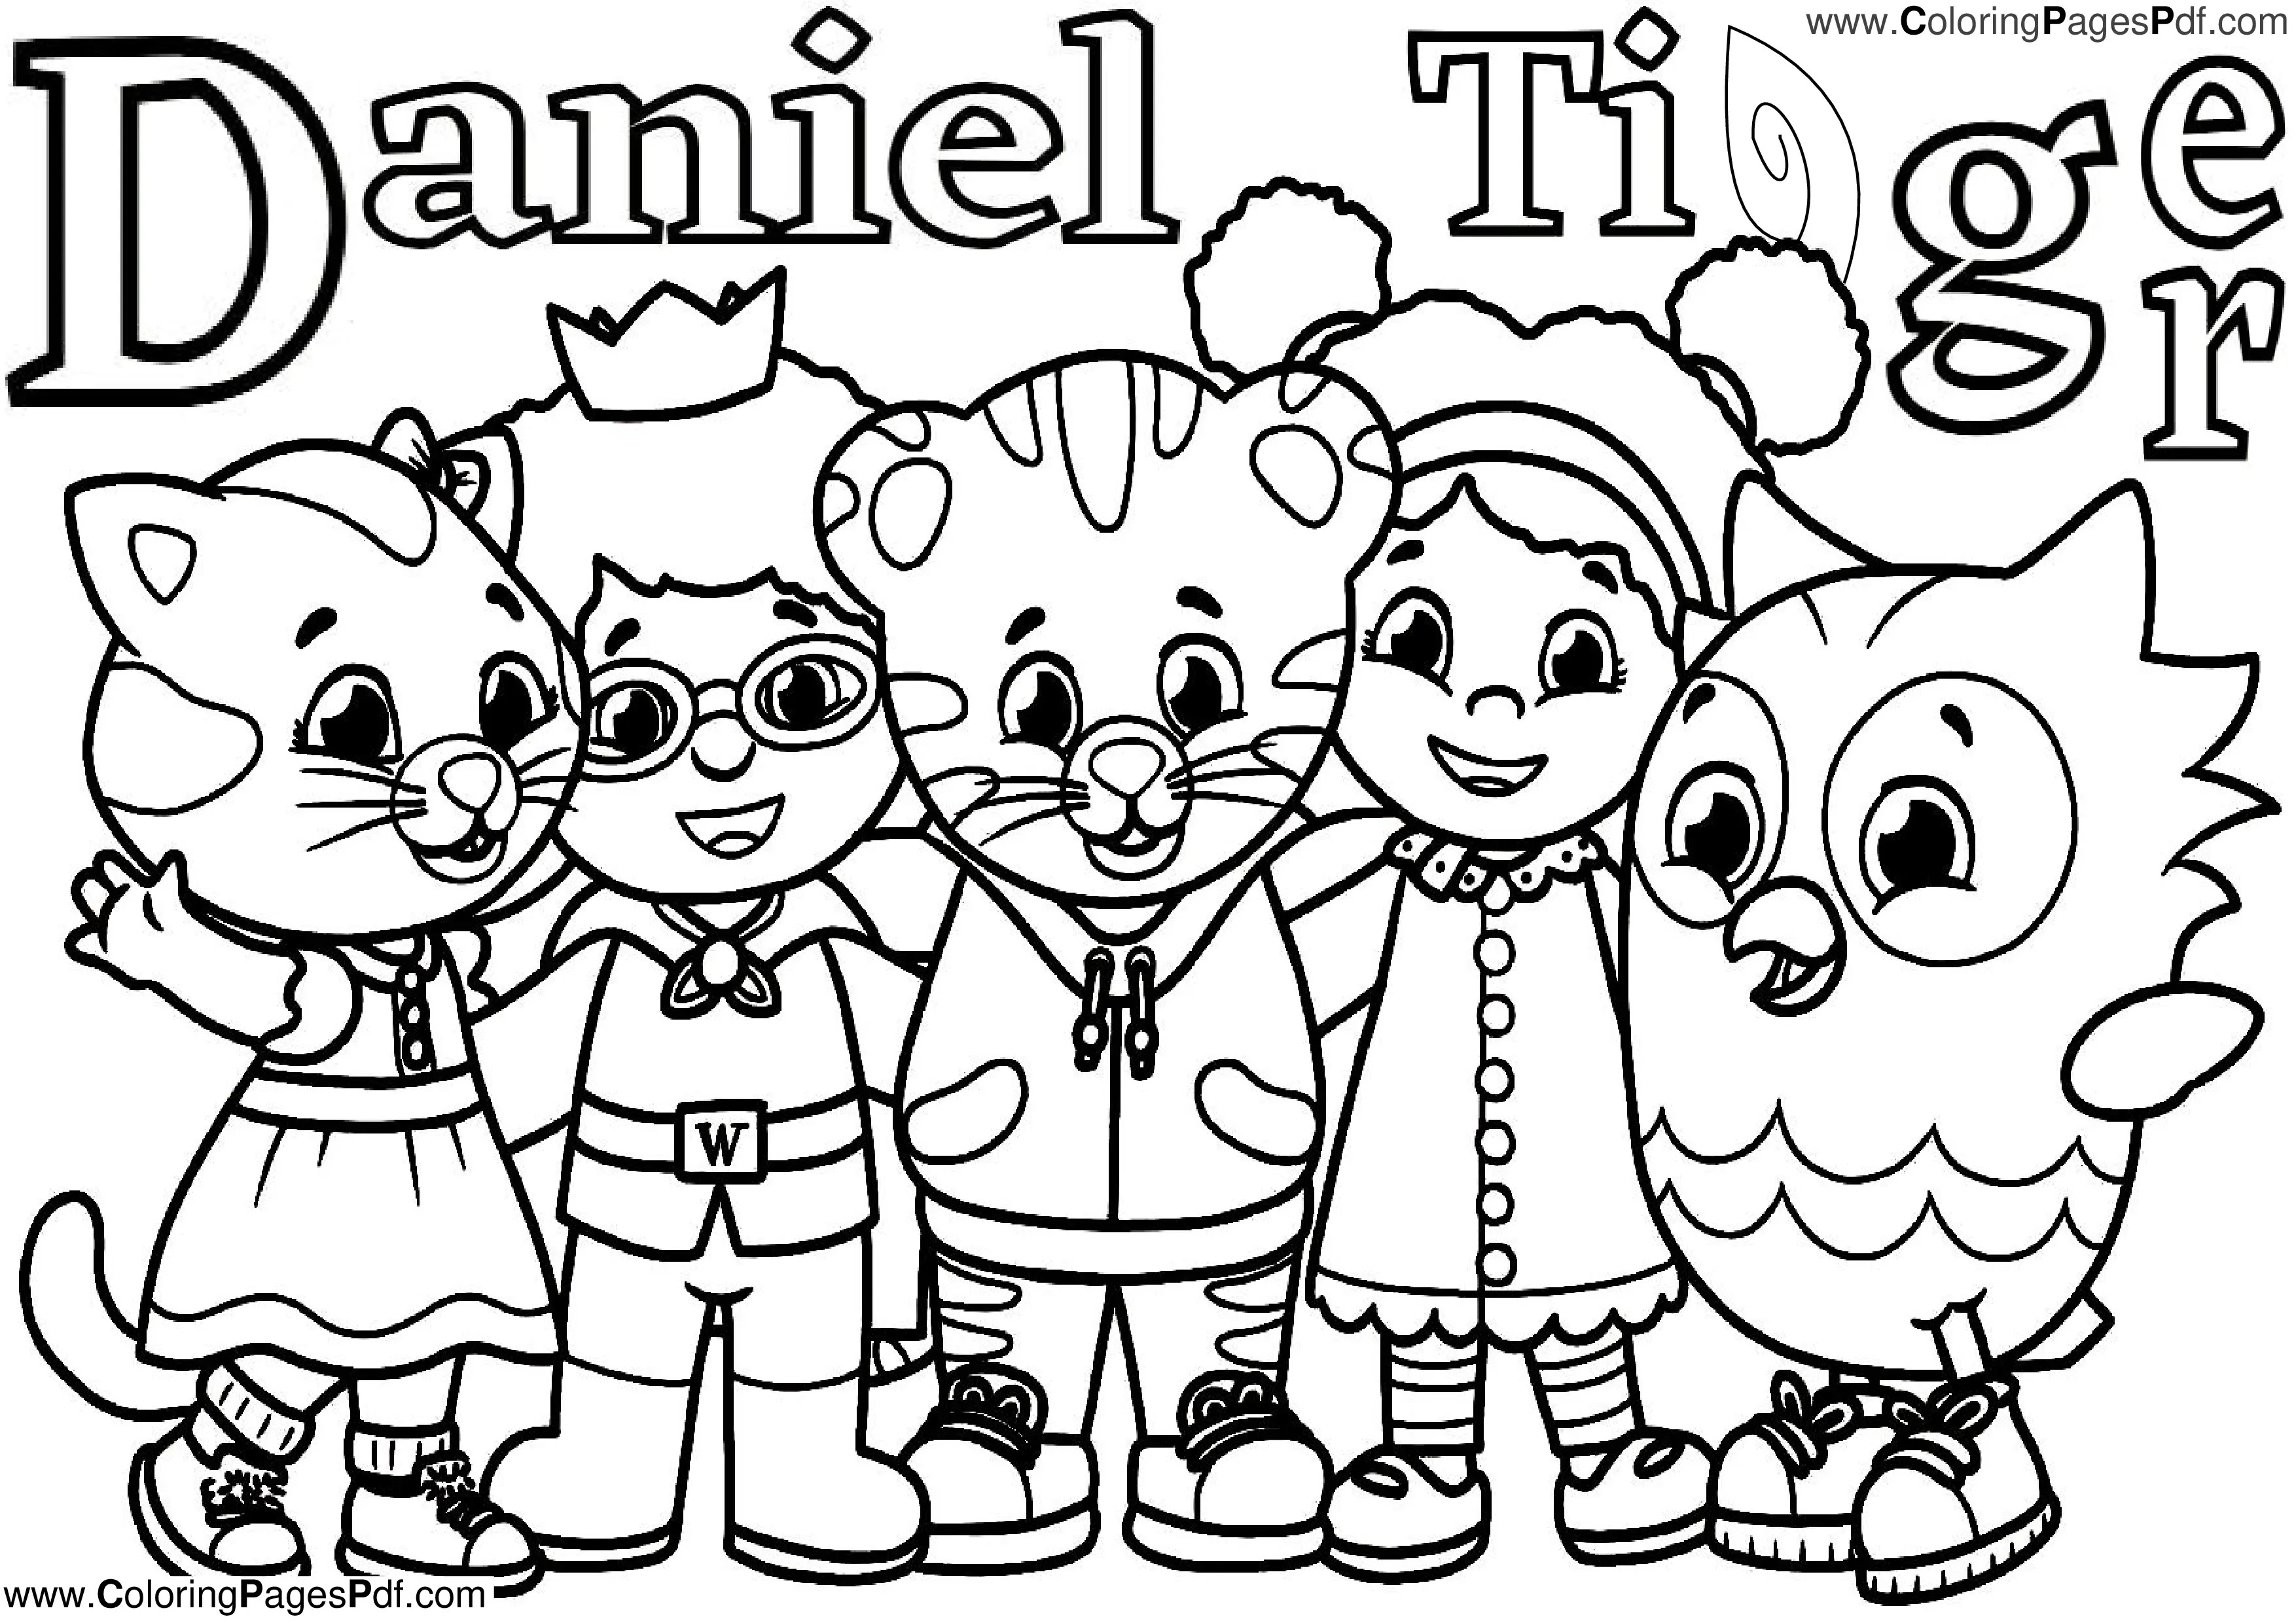 Free daniel tiger coloring pages